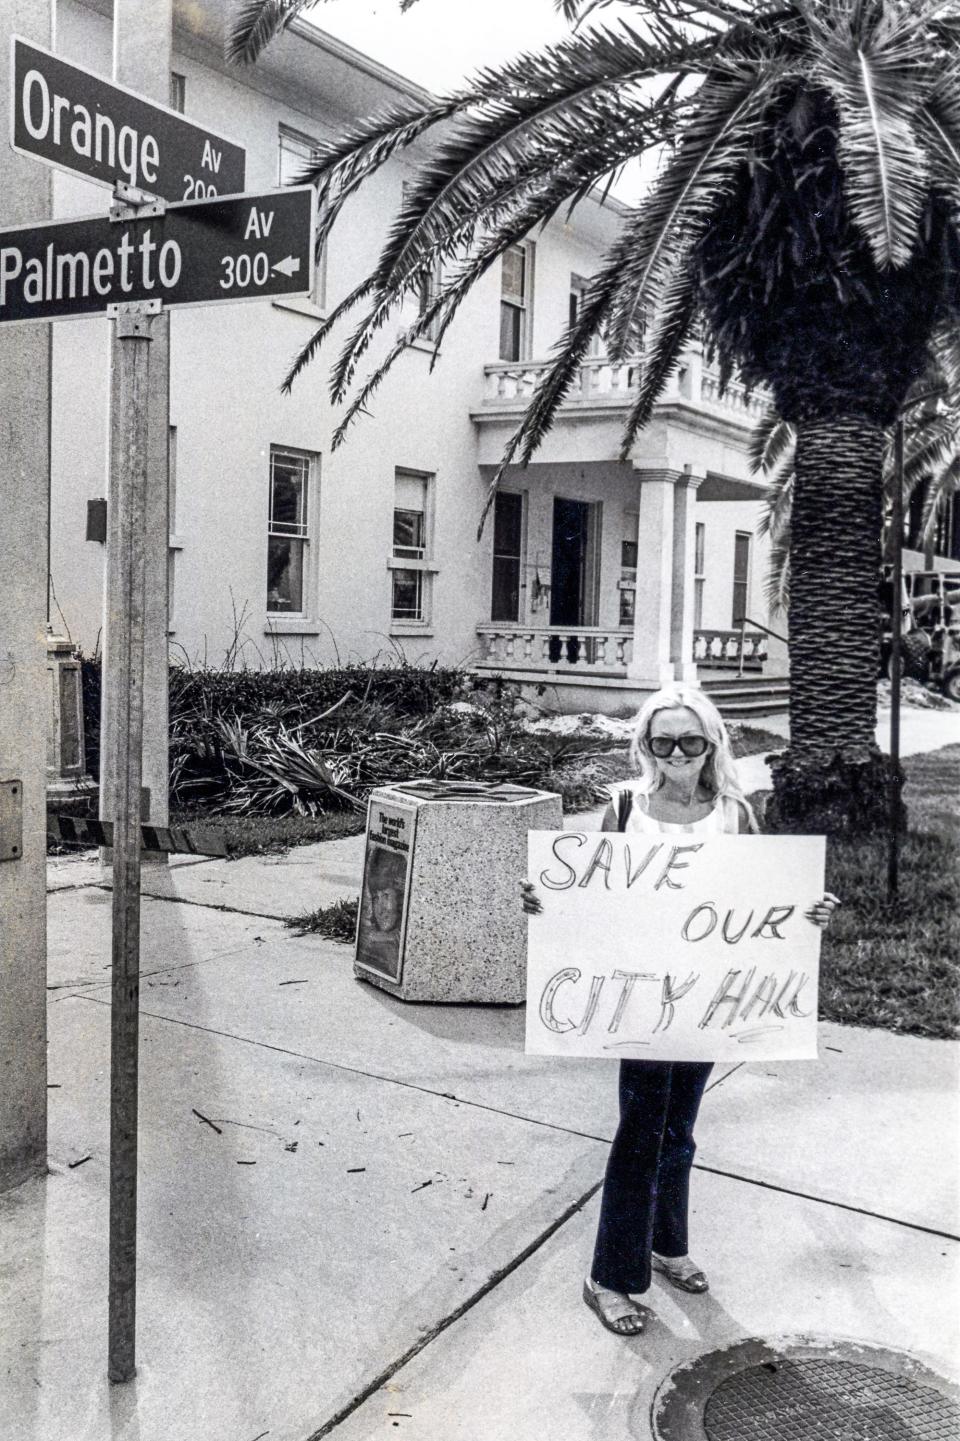 In 1976, some local residents didn't want Daytona Beach's City Hall at the corner of Palmetto and Orange avenues that had been used since 1920 to be torn down. The protestors lost, the building was demolished, and a new City Hall was built a short distance to the west.